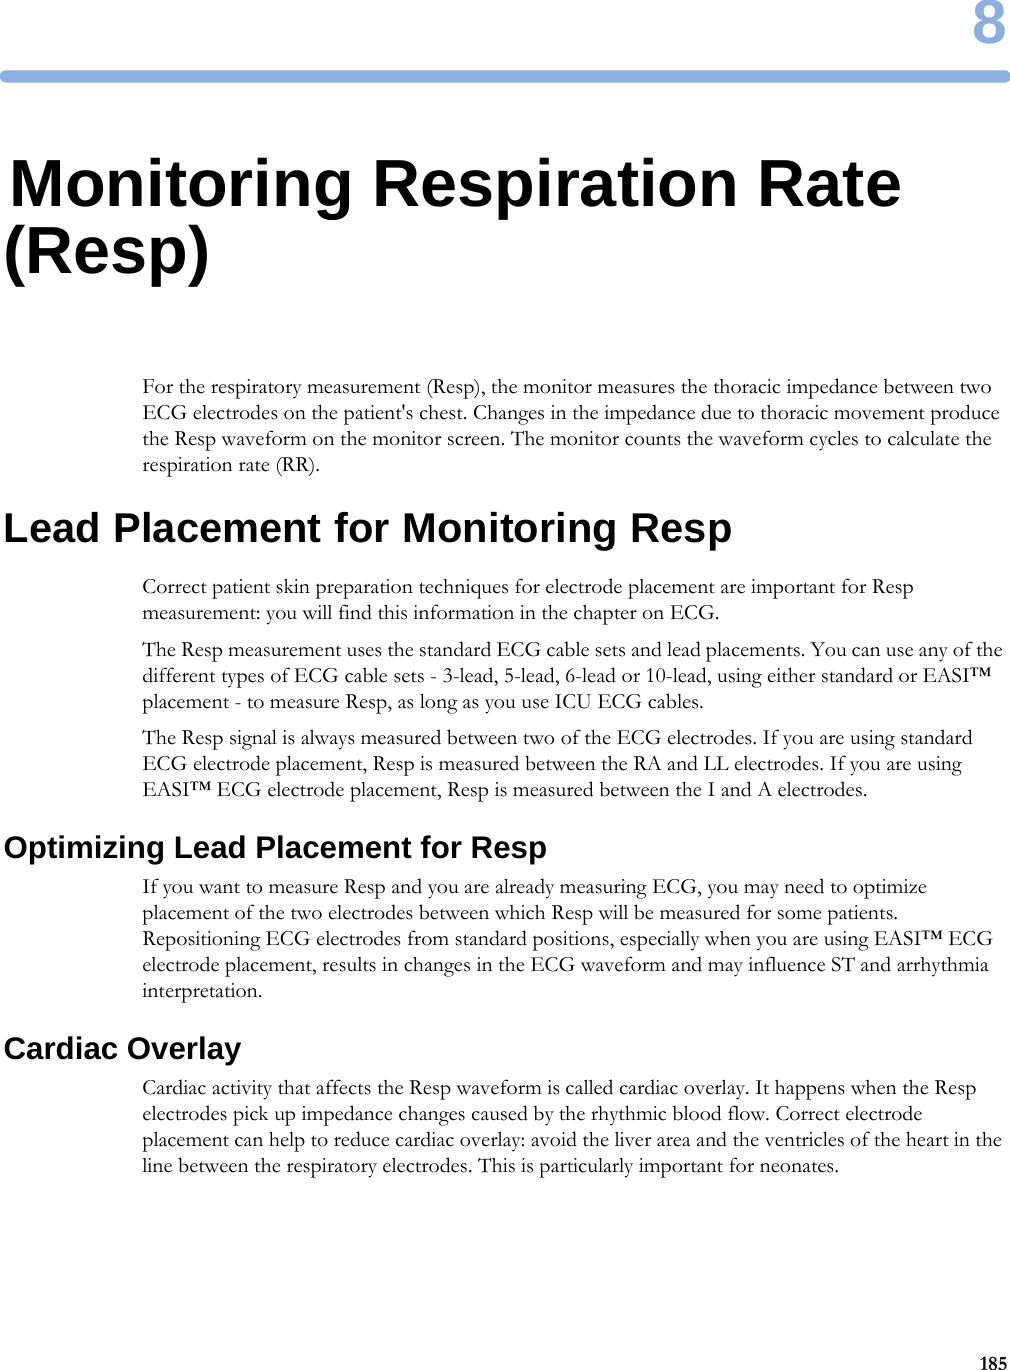 81858Monitoring Respiration Rate (Resp)For the respiratory measurement (Resp), the monitor measures the thoracic impedance between two ECG electrodes on the patient&apos;s chest. Changes in the impedance due to thoracic movement produce the Resp waveform on the monitor screen. The monitor counts the waveform cycles to calculate the respiration rate (RR).Lead Placement for Monitoring RespCorrect patient skin preparation techniques for electrode placement are important for Resp measurement: you will find this information in the chapter on ECG.The Resp measurement uses the standard ECG cable sets and lead placements. You can use any of the different types of ECG cable sets - 3-lead, 5-lead, 6-lead or 10-lead, using either standard or EASI™ placement - to measure Resp, as long as you use ICU ECG cables.The Resp signal is always measured between two of the ECG electrodes. If you are using standard ECG electrode placement, Resp is measured between the RA and LL electrodes. If you are using EASI™ ECG electrode placement, Resp is measured between the I and A electrodes.Optimizing Lead Placement for RespIf you want to measure Resp and you are already measuring ECG, you may need to optimize placement of the two electrodes between which Resp will be measured for some patients. Repositioning ECG electrodes from standard positions, especially when you are using EASI™ ECG electrode placement, results in changes in the ECG waveform and may influence ST and arrhythmia interpretation.Cardiac OverlayCardiac activity that affects the Resp waveform is called cardiac overlay. It happens when the Resp electrodes pick up impedance changes caused by the rhythmic blood flow. Correct electrode placement can help to reduce cardiac overlay: avoid the liver area and the ventricles of the heart in the line between the respiratory electrodes. This is particularly important for neonates.